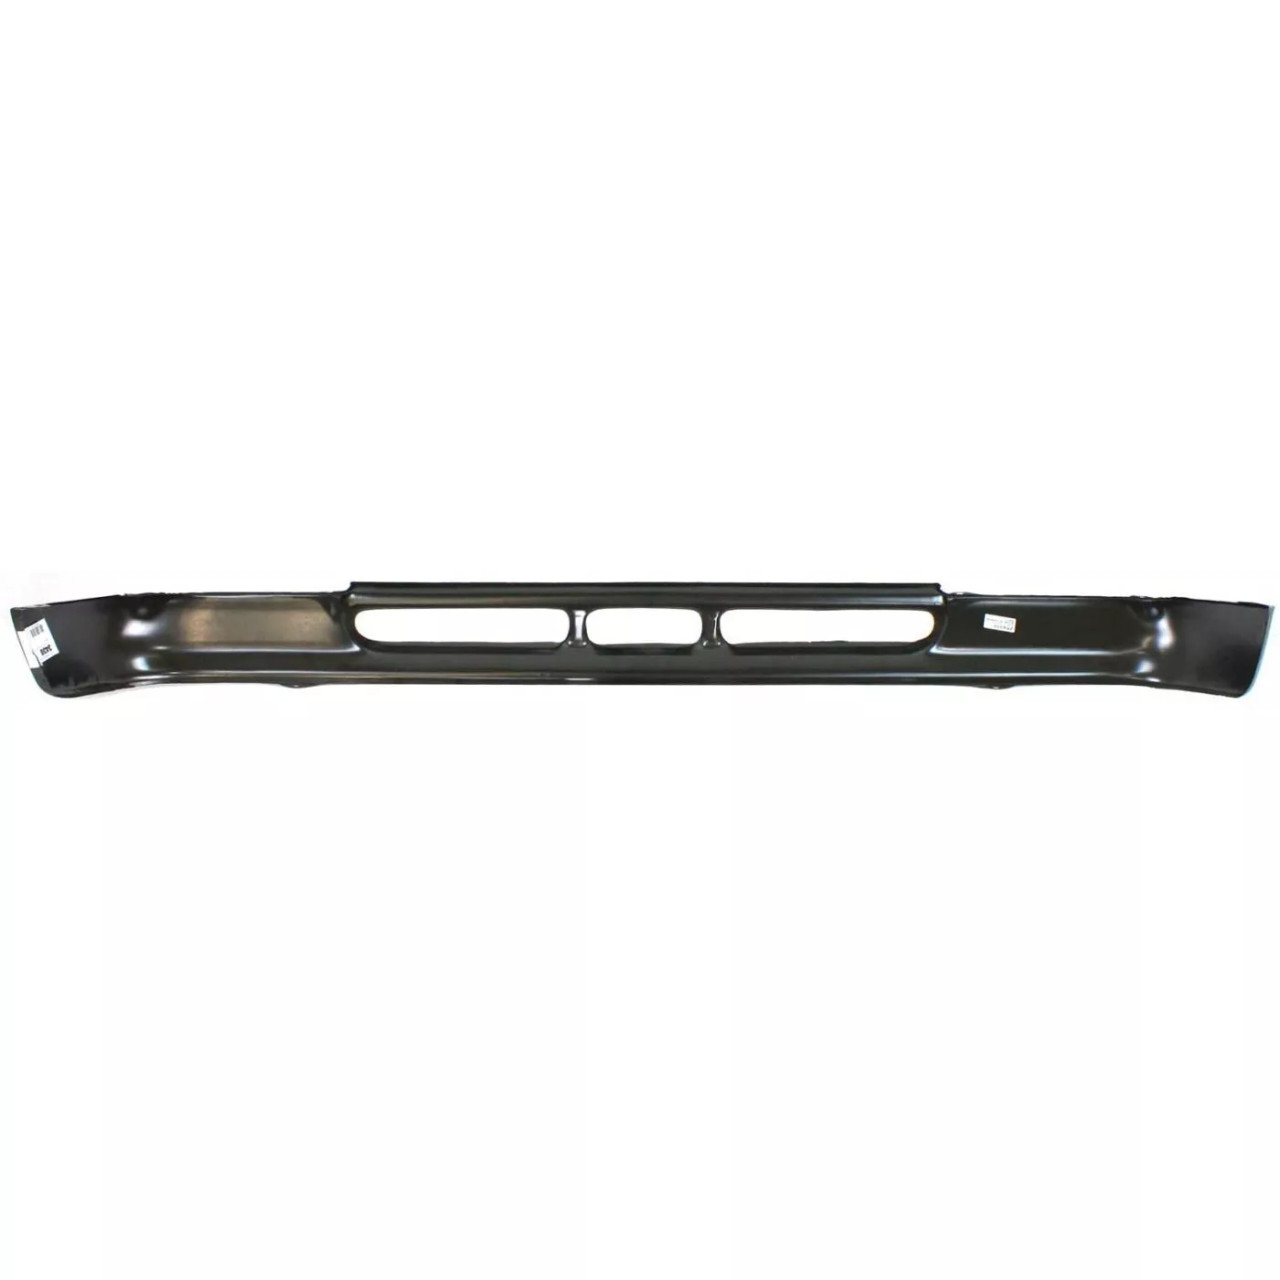 Front Valance For 1992-1995 Toyota Pickup RWD Black